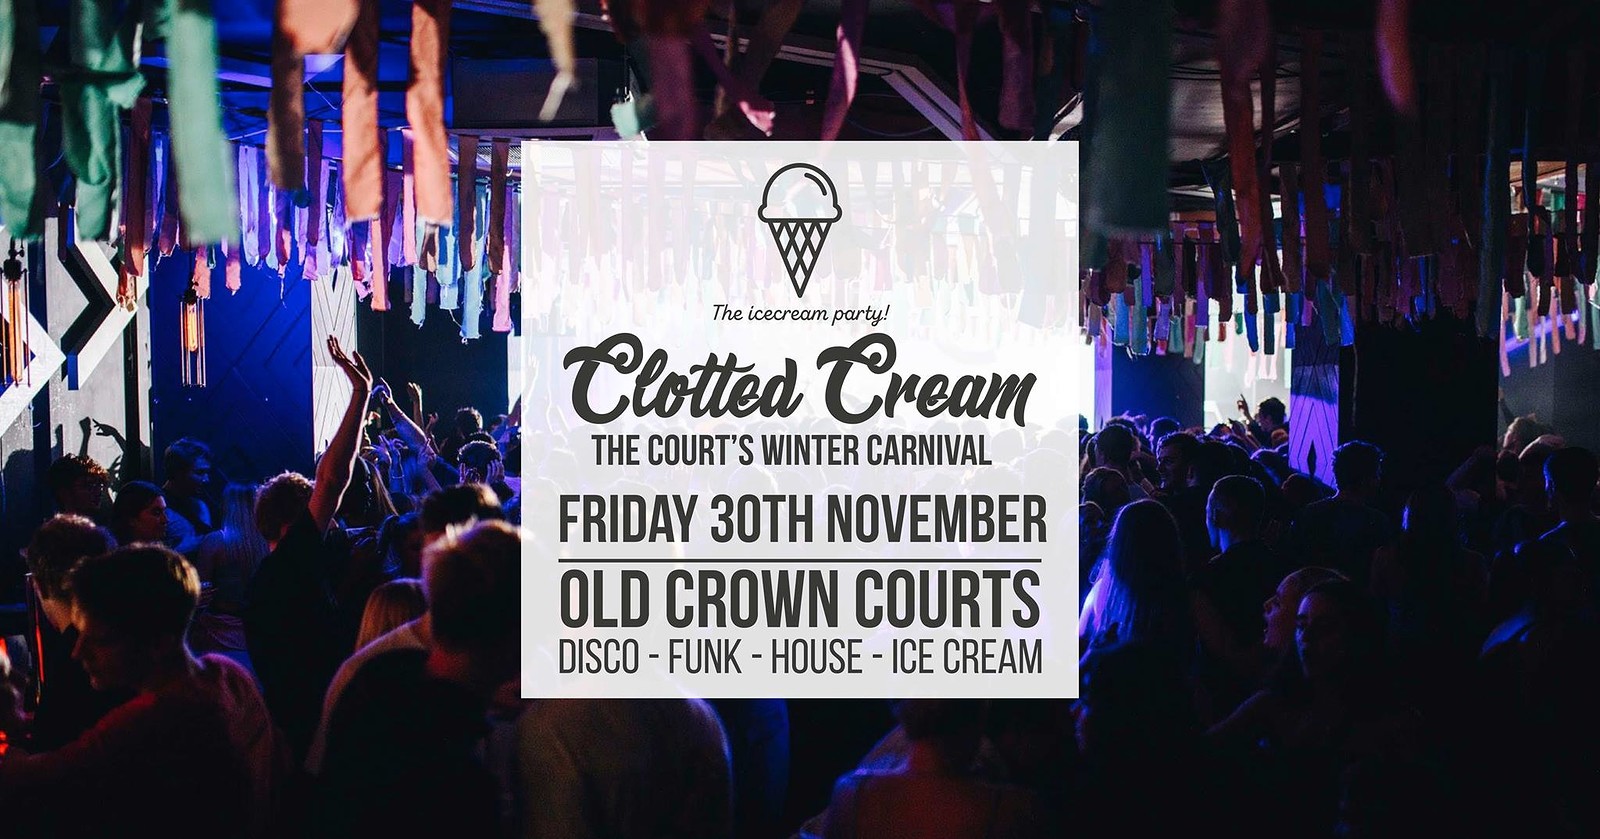 Clotted Cream: The Courts' Winter Carnival at The Old Crown Courts